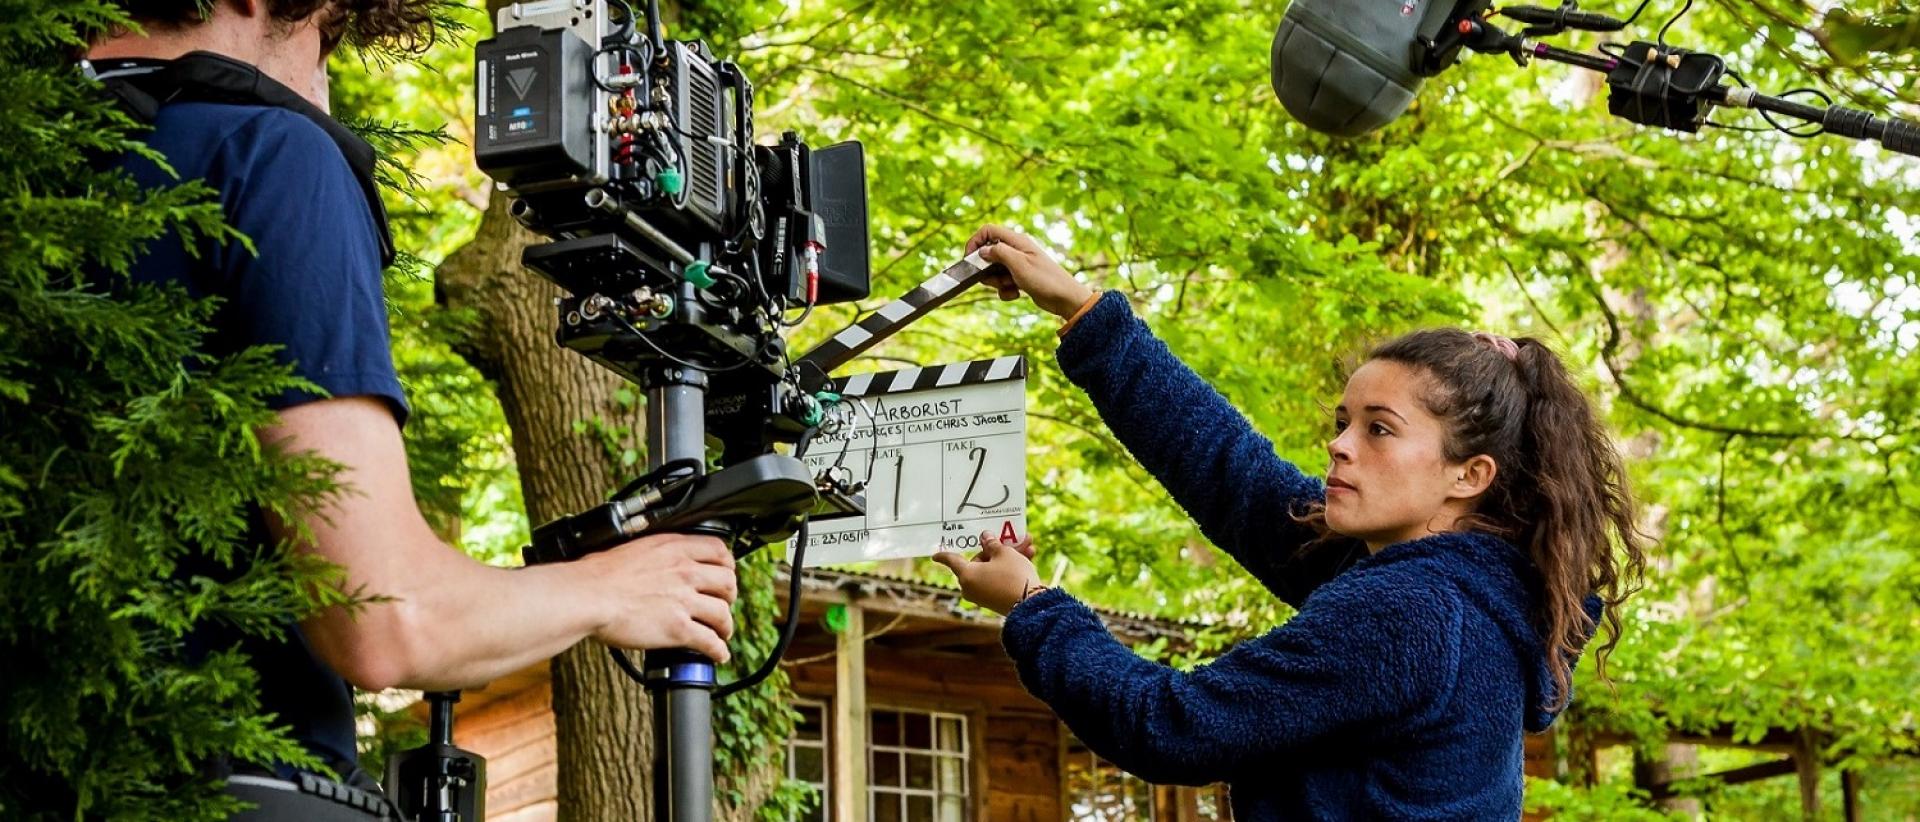 A photo of two people working on a film set outside a wood cabin in a wooded area. 